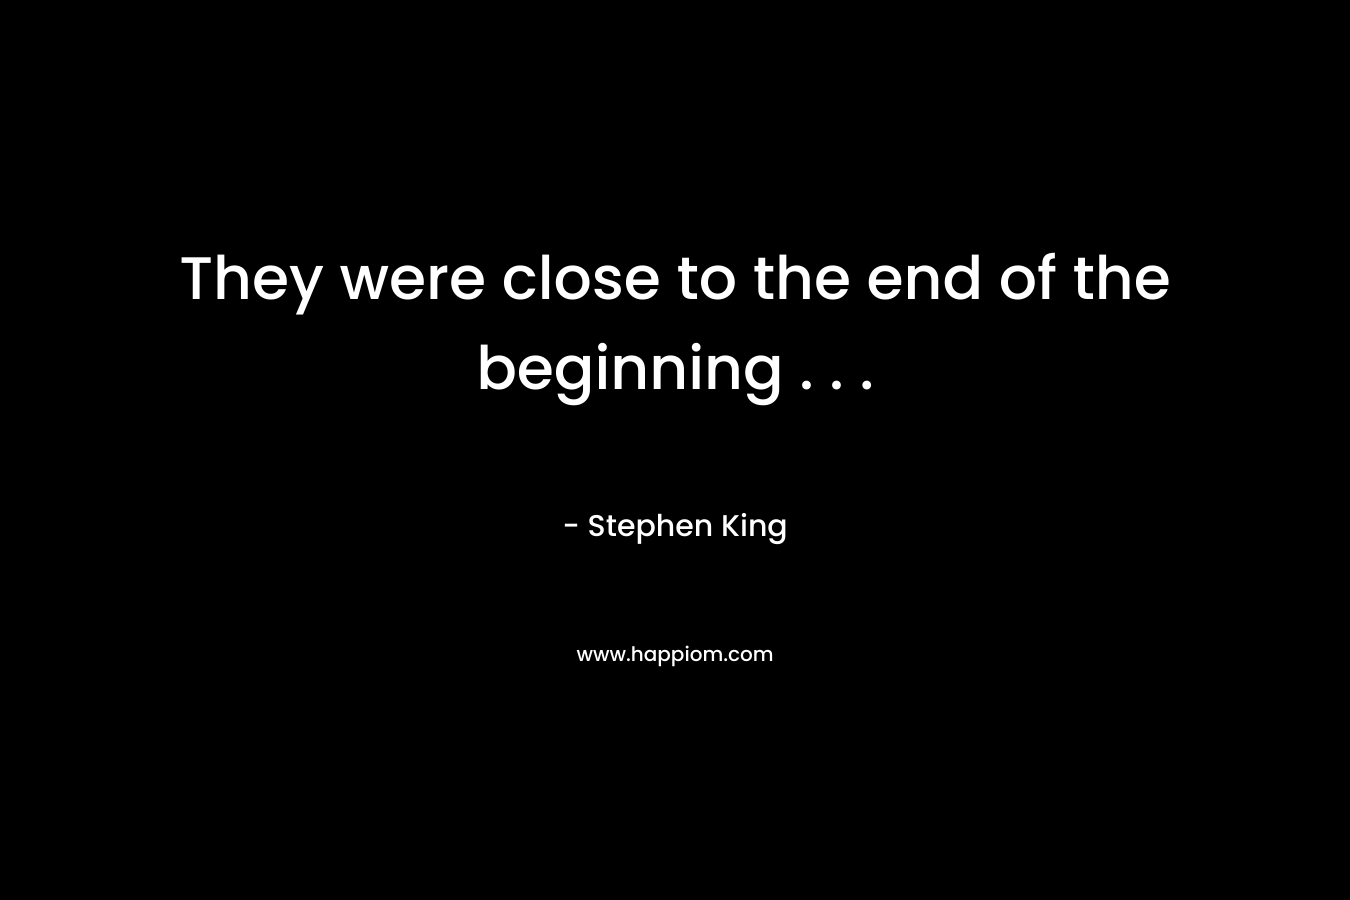 They were close to the end of the beginning . . .